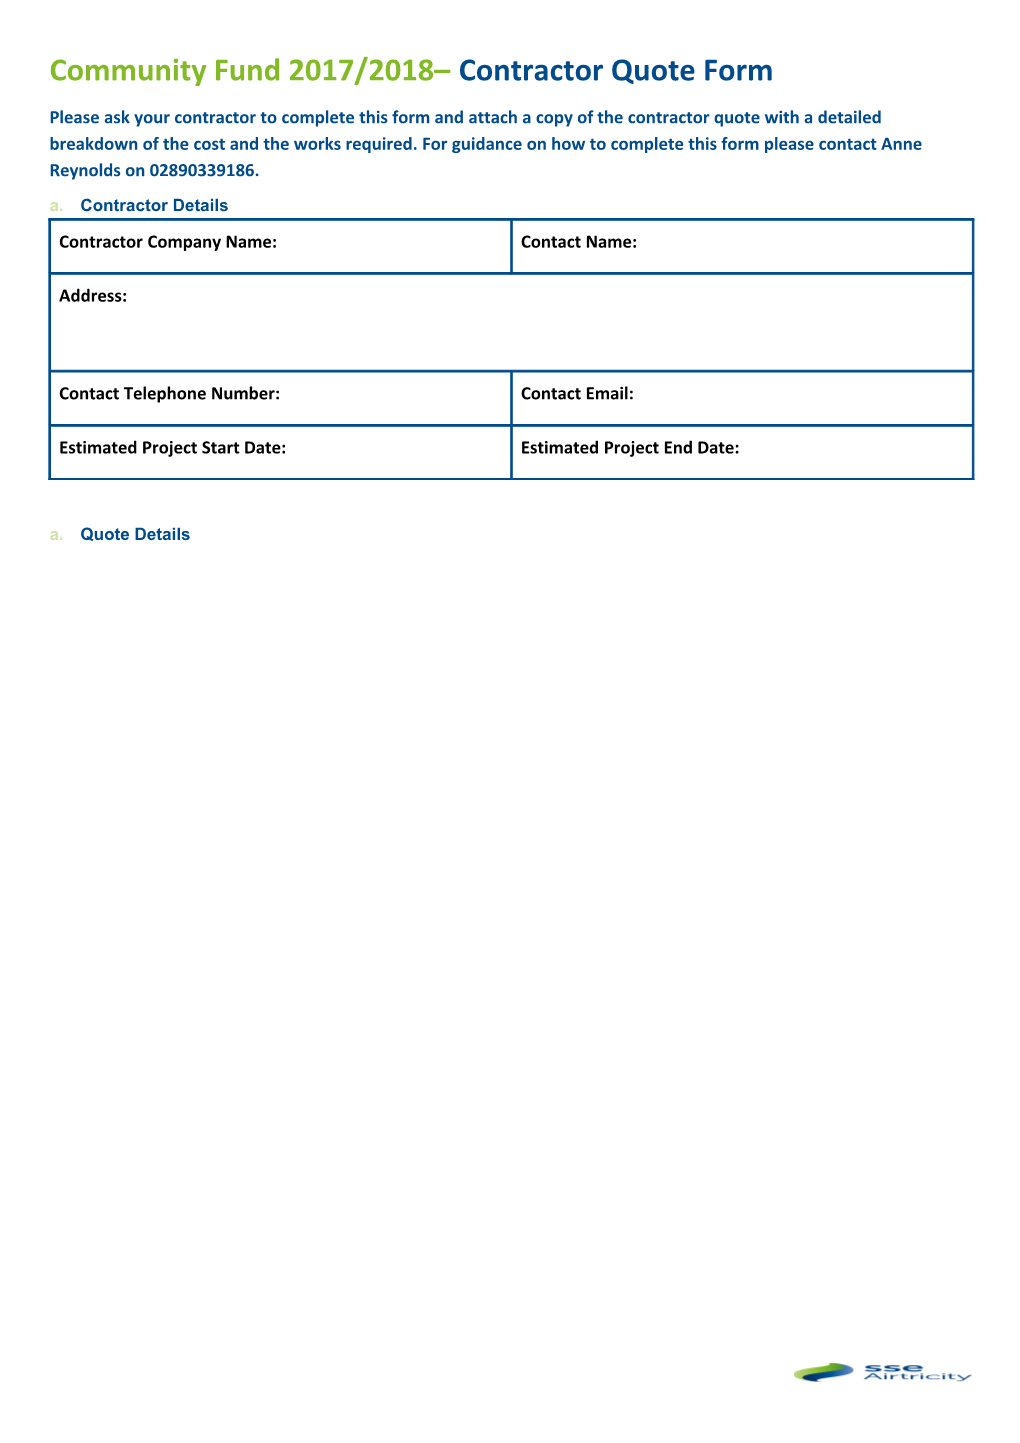 Community Fund 2017/2018 Contractor Quote Form